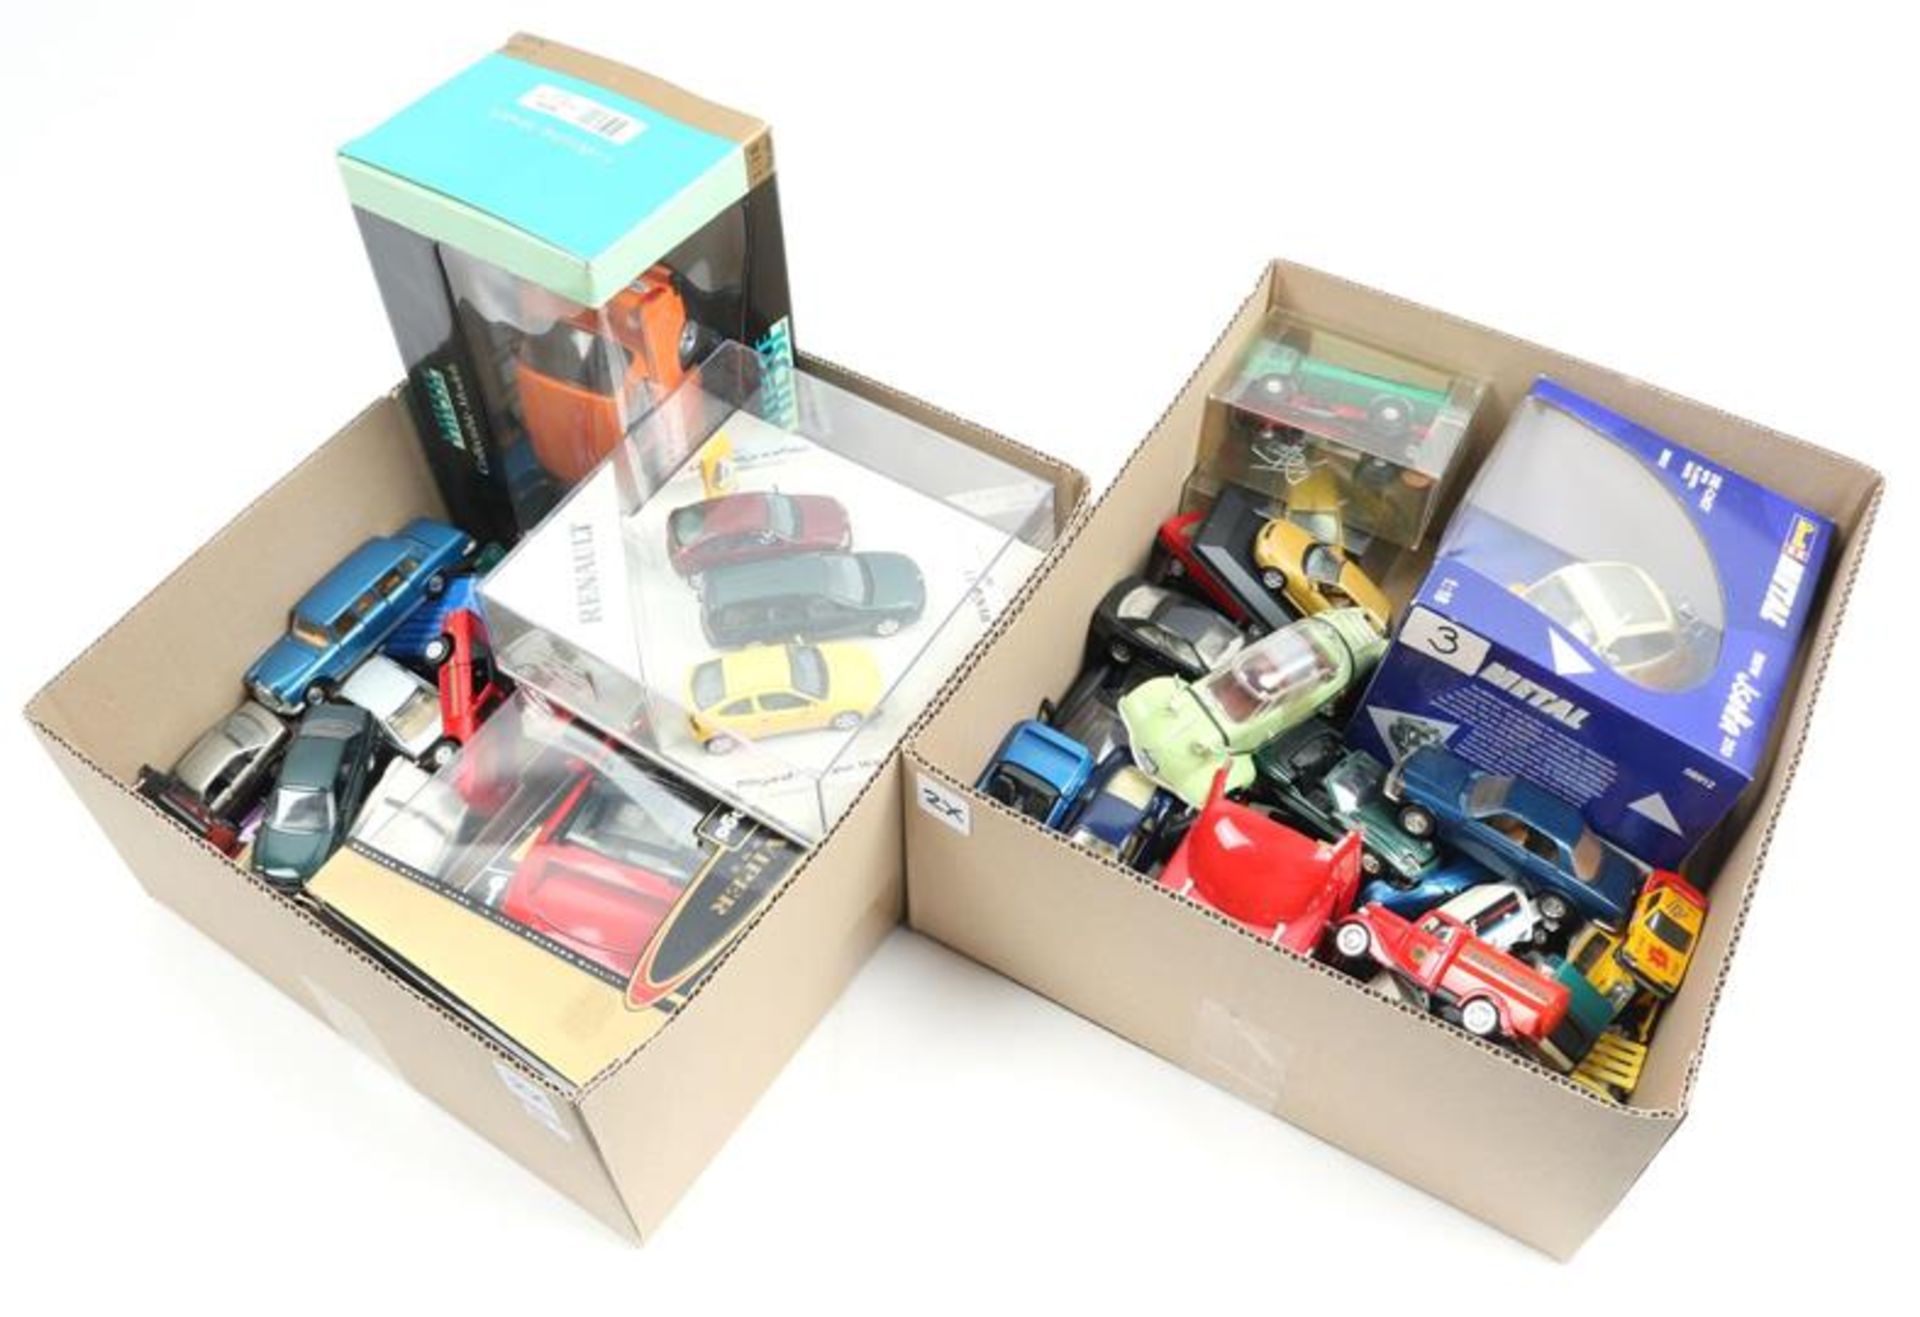 2 boxes of scale model cars including BMW, Audi and other brands